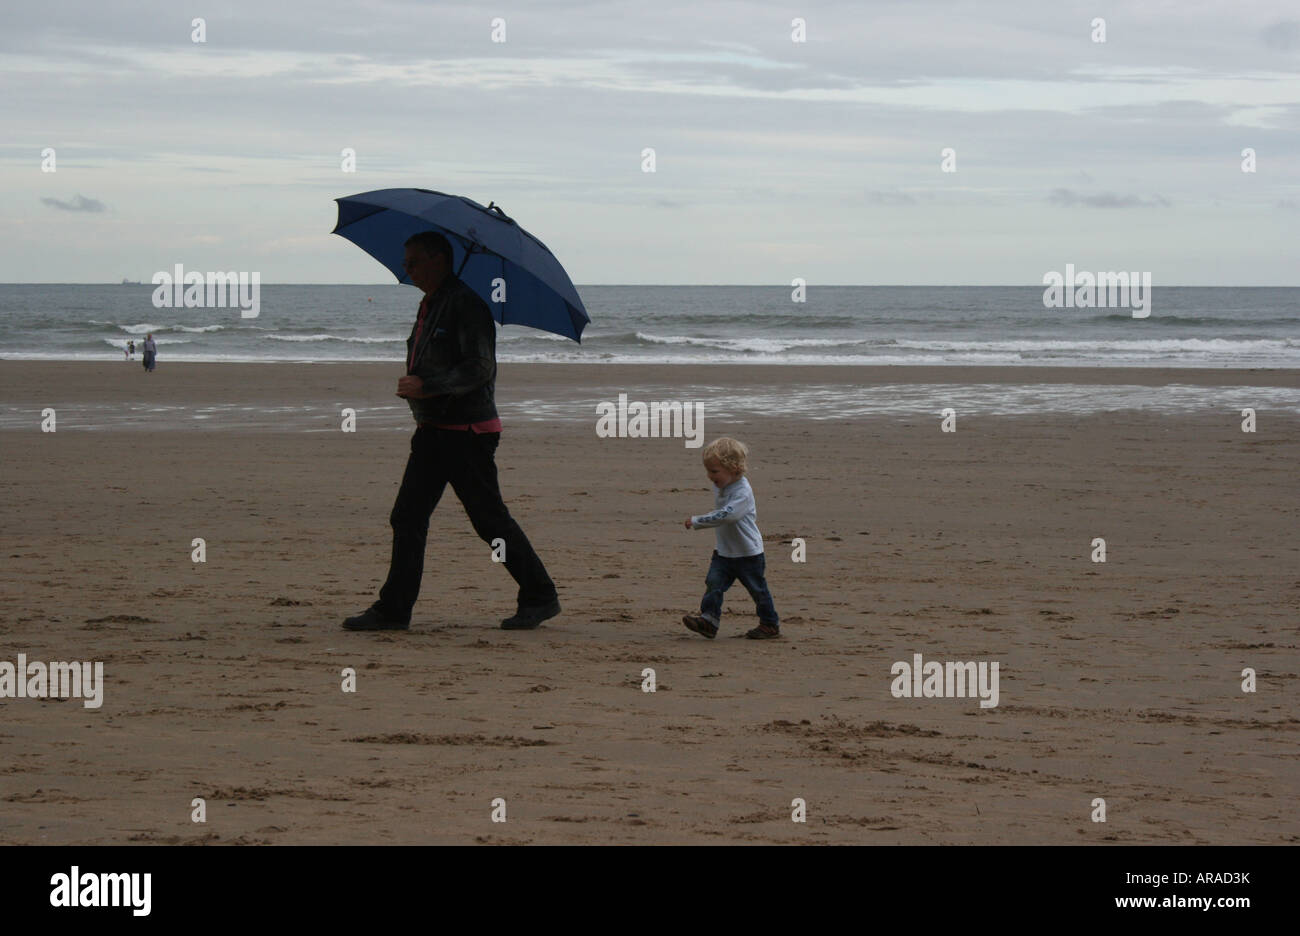 A man walking on the beach with an umbrella is followed by his toddler grandson mimicking his steps. Stock Photo